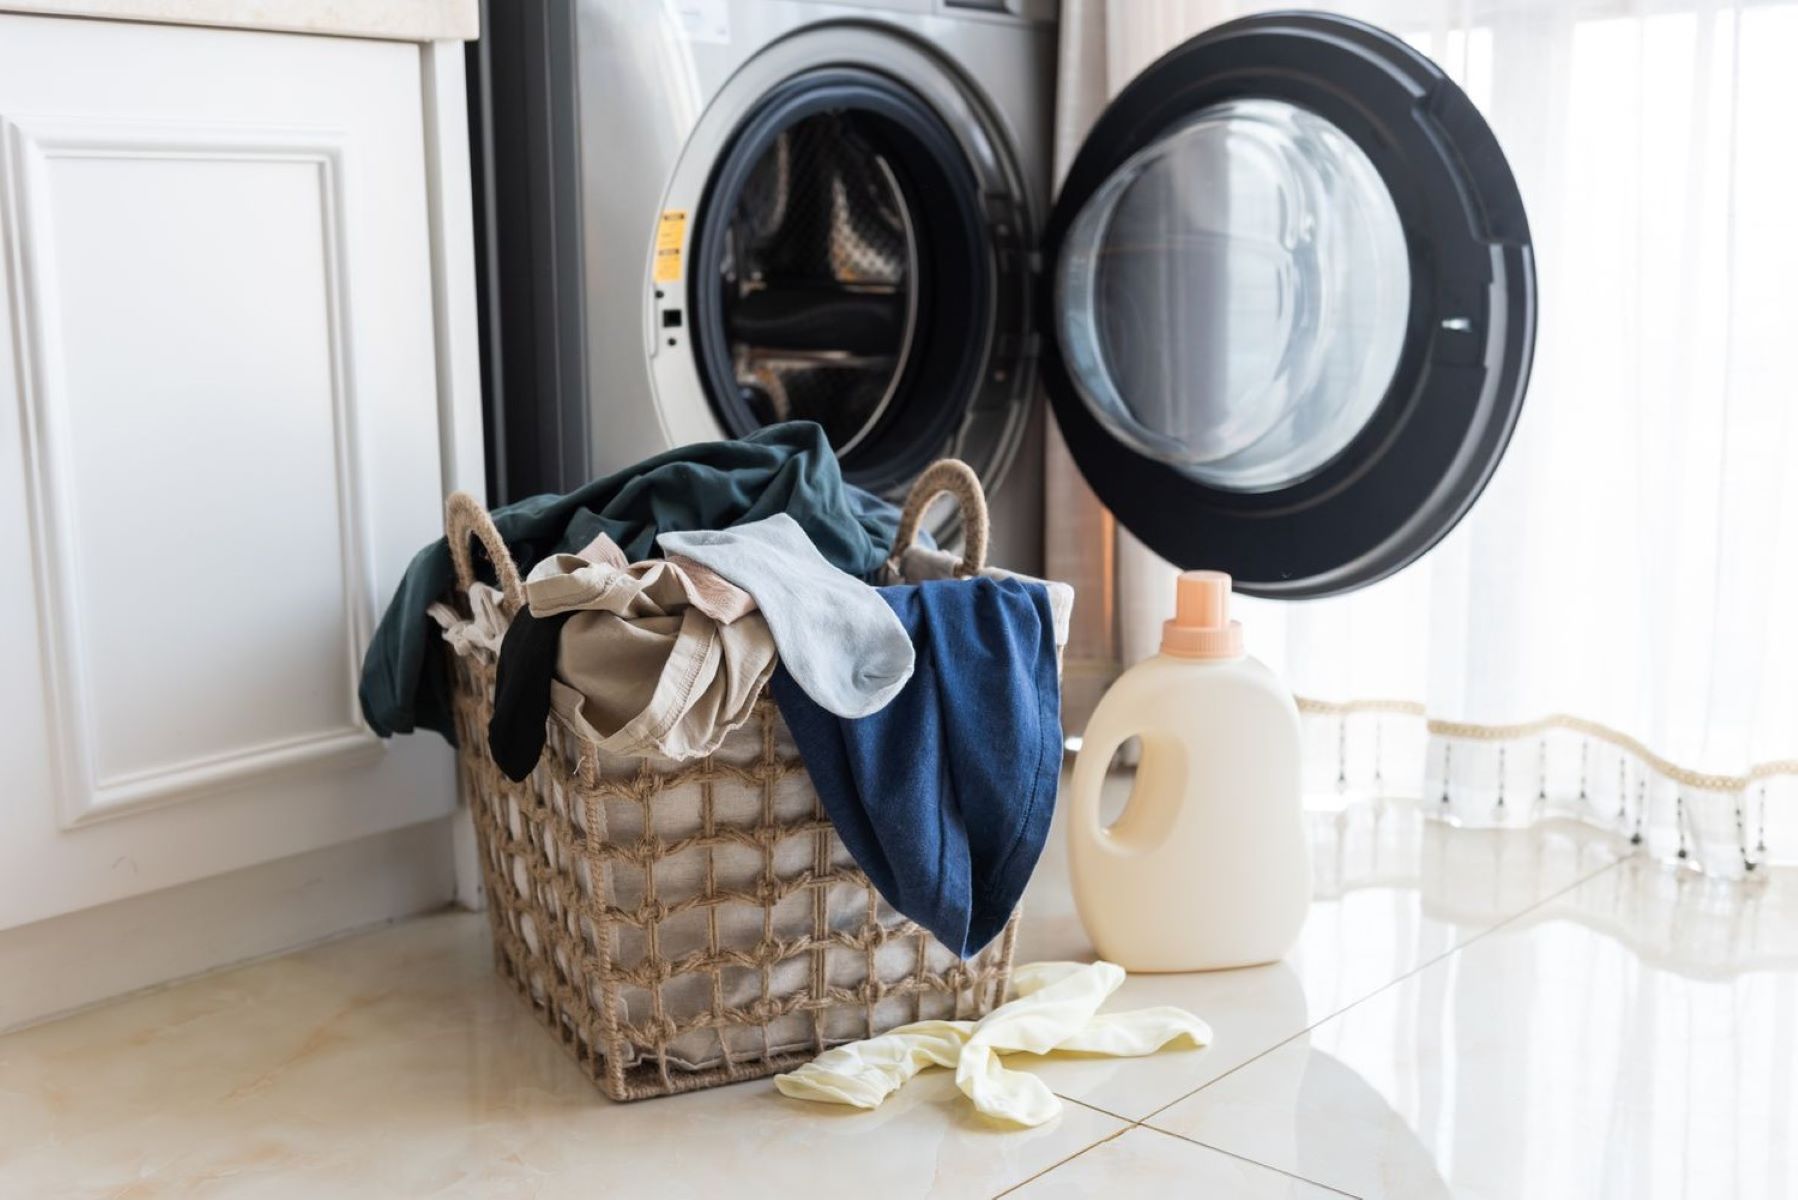 How To Reset A Whirlpool Washing Machine